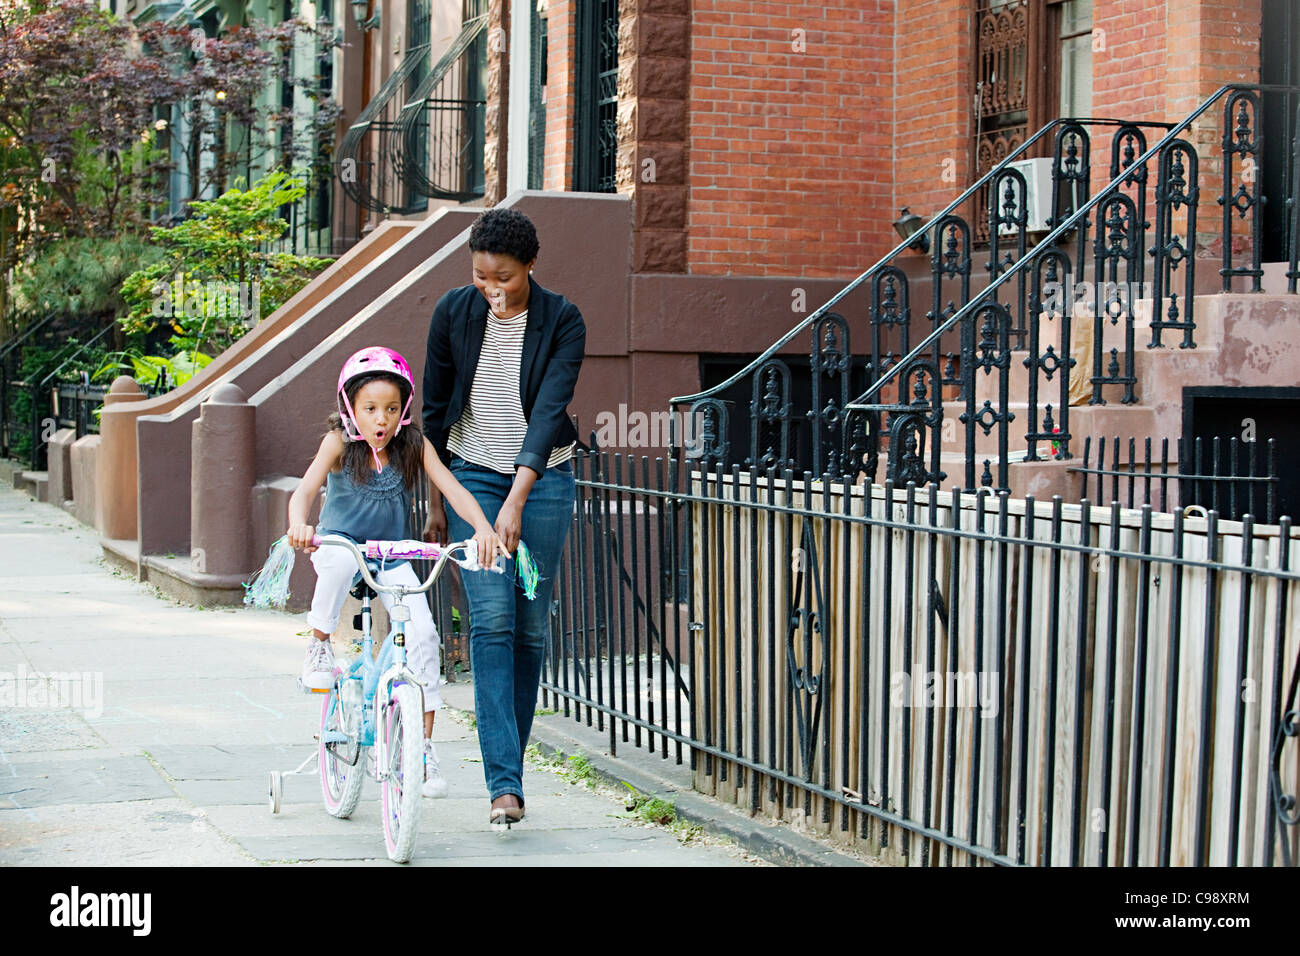 Daughter learning to ride bicycle along sidewalk with mother Stock Photo